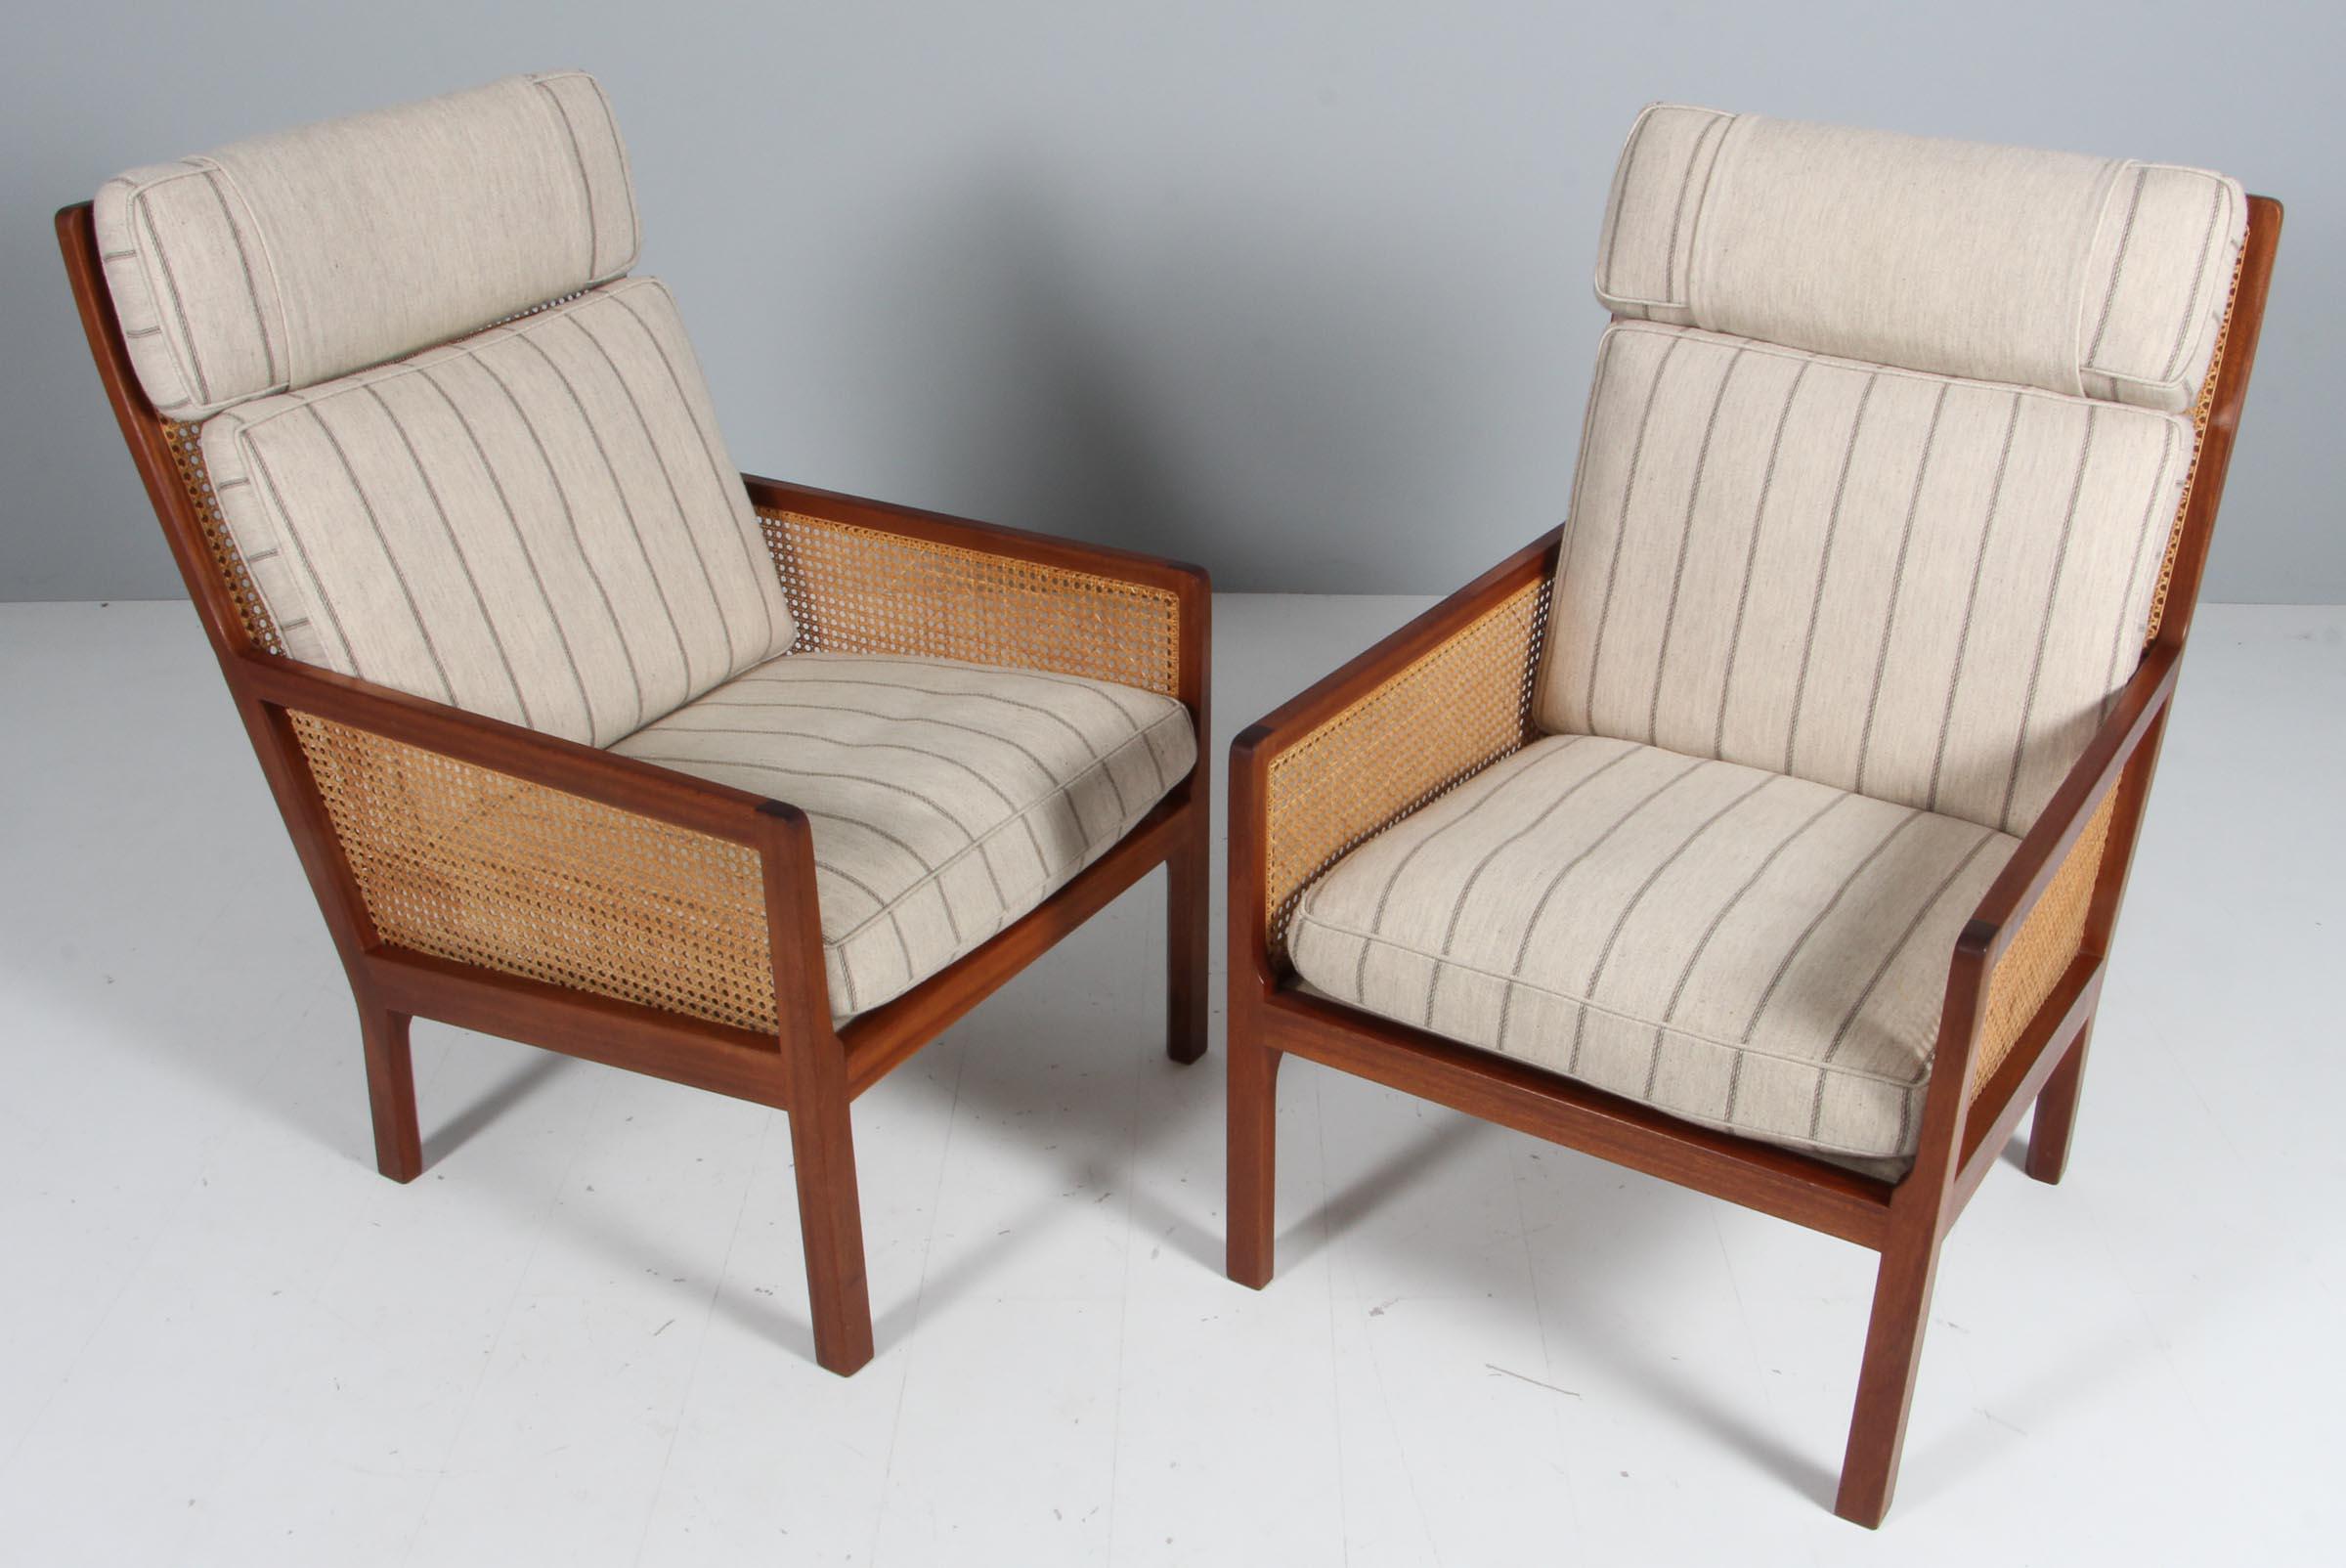 Bernt Pedersen pair of lounge chairs with frame of mahogany, back and sides from cane.

Original wool upholstery.

Made by Wørtz Snedkeri.